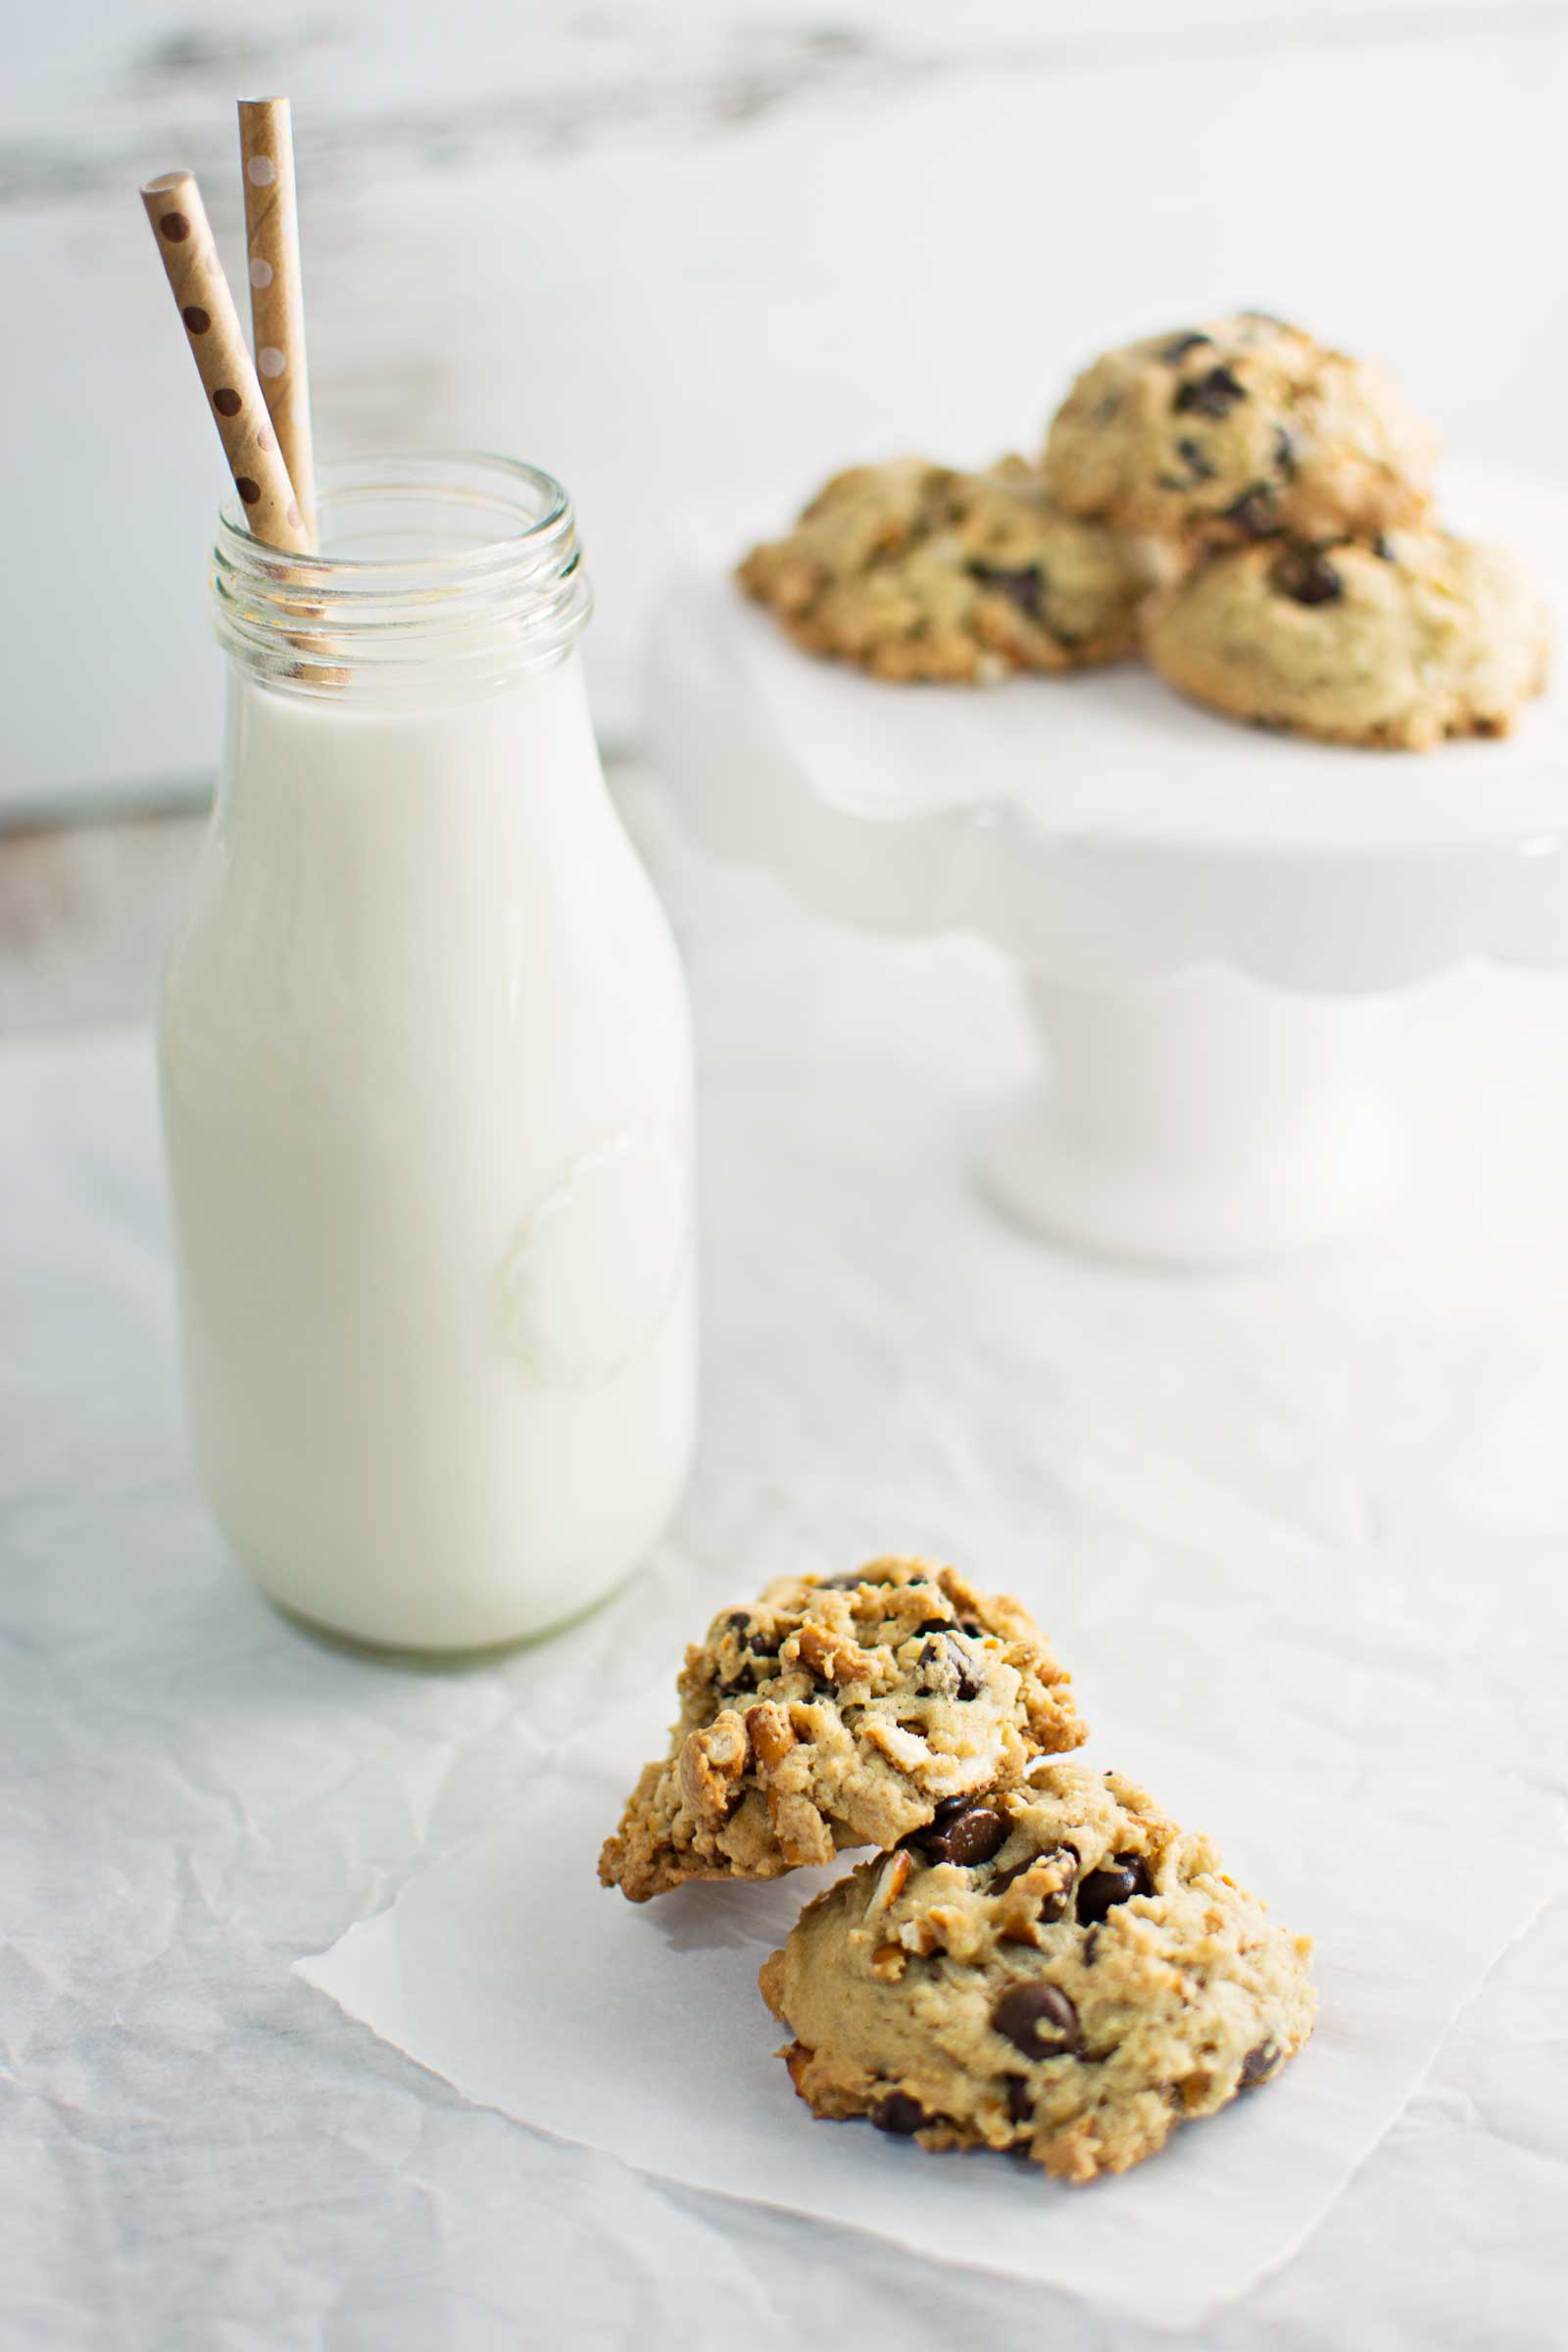 Enjoy a tall glass of cold milk with these tasty treats, Chocolate Chip Pretzel Cookies! Recipe @LittleFiggyFood